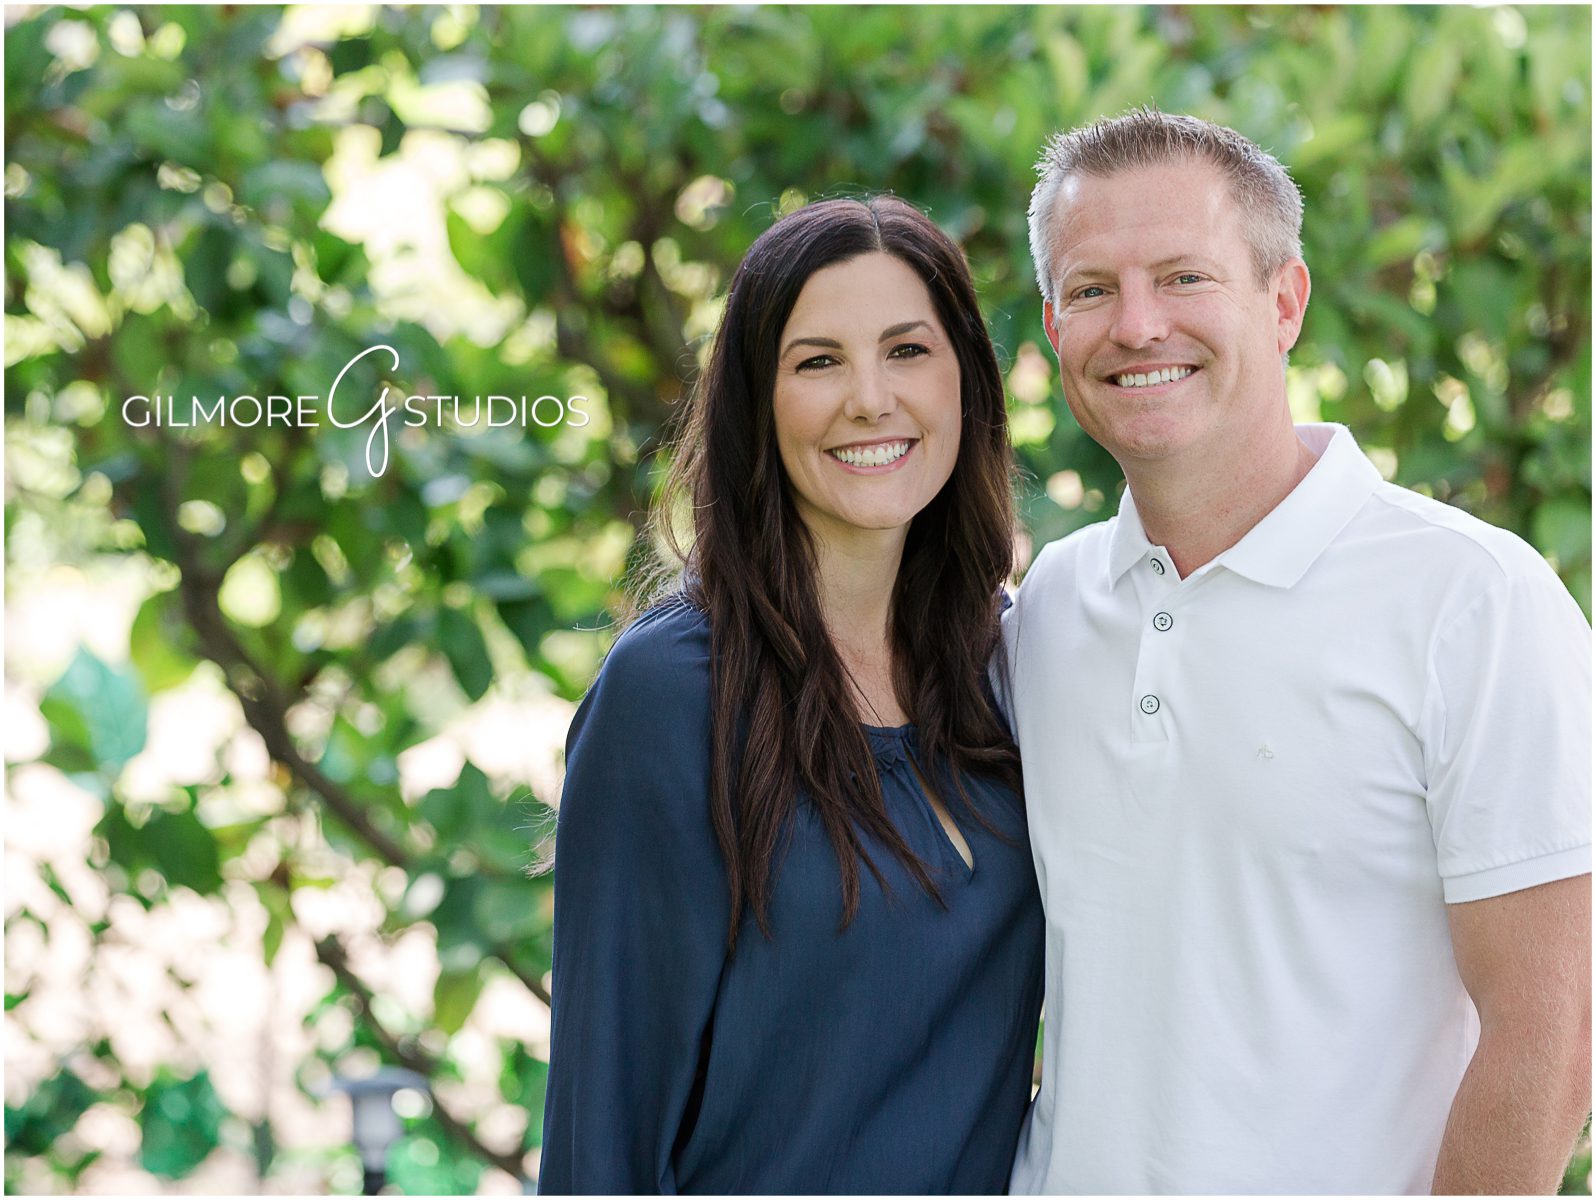 Orange County Family Photography, mom and dad, portrait session, garden studio, outdoors